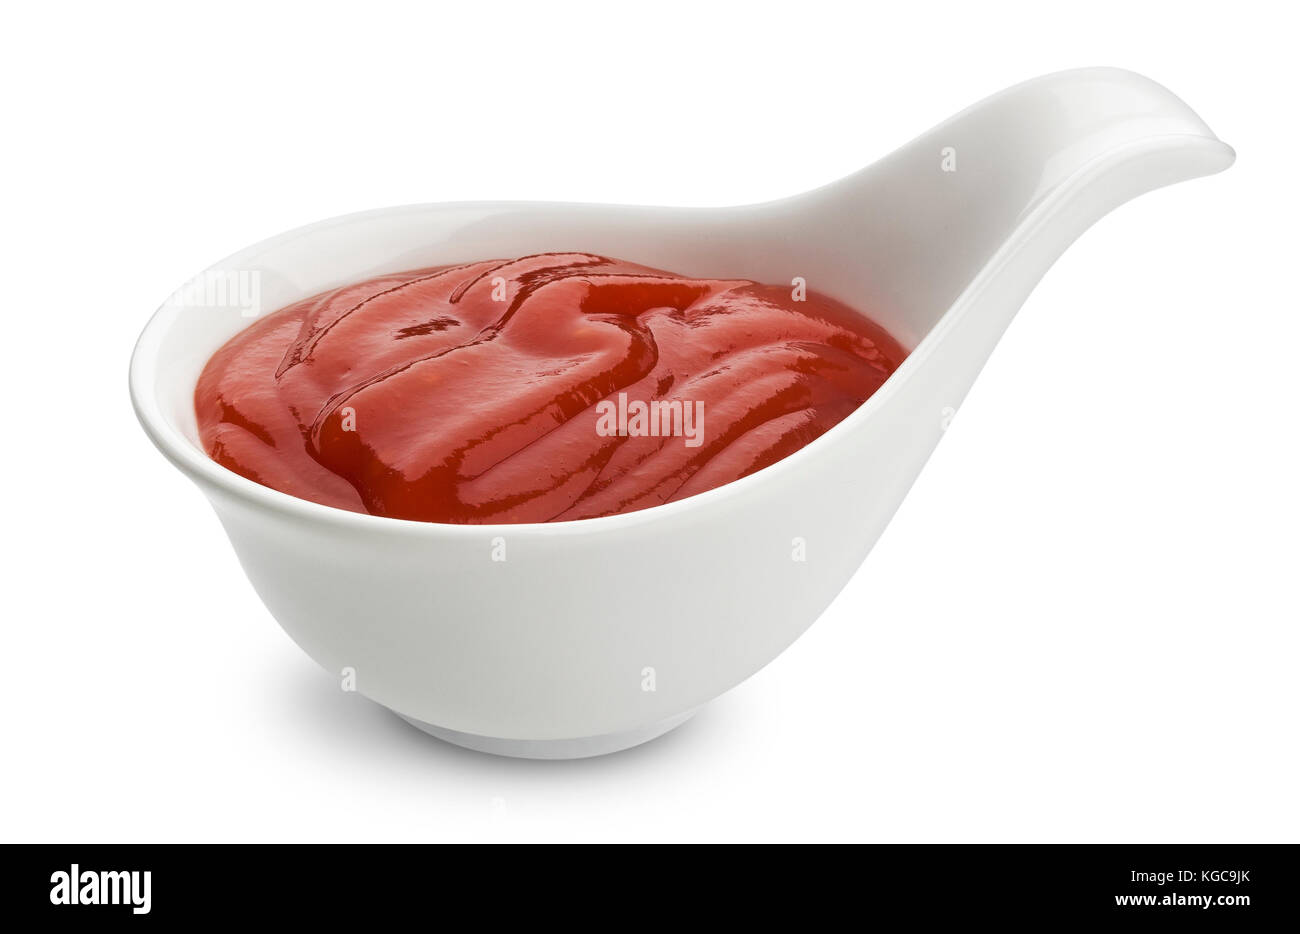 Ketchup isolated on white background, tomato sauce in bowl Stock Photo